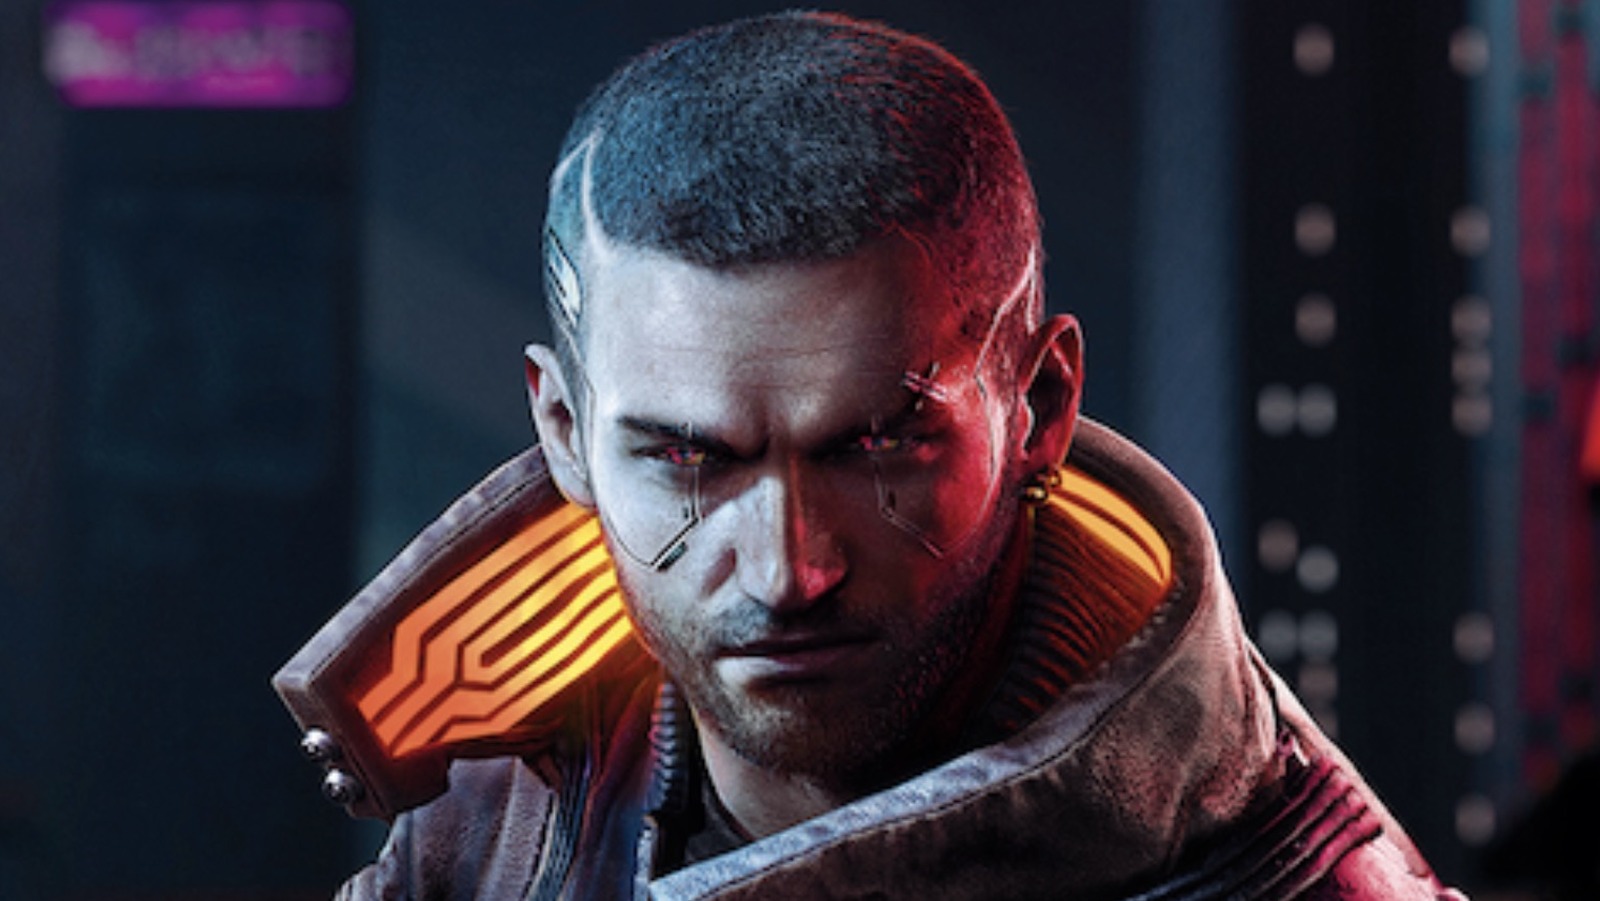 The Small Detail You Missed In The Cyberpunk 2077 Launch Trailer